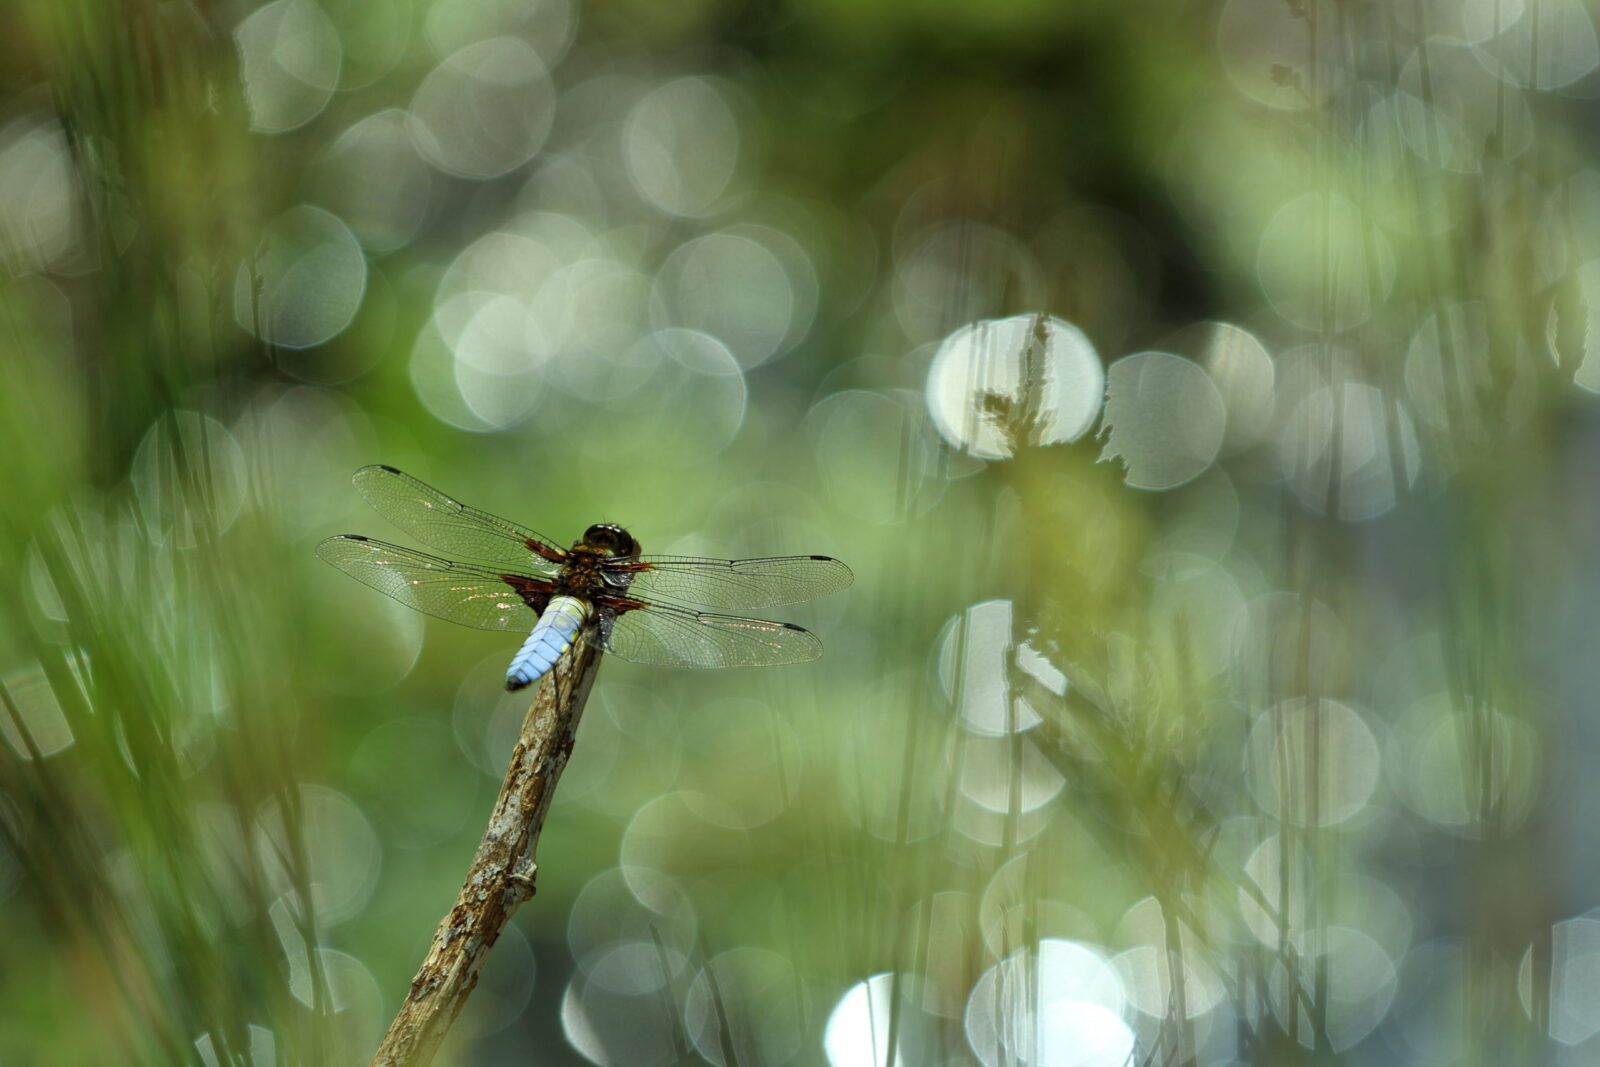 Banner image for Aquatic Insect SIG, Broad Bodied Chaser dragonfly on a stick agains at green background.